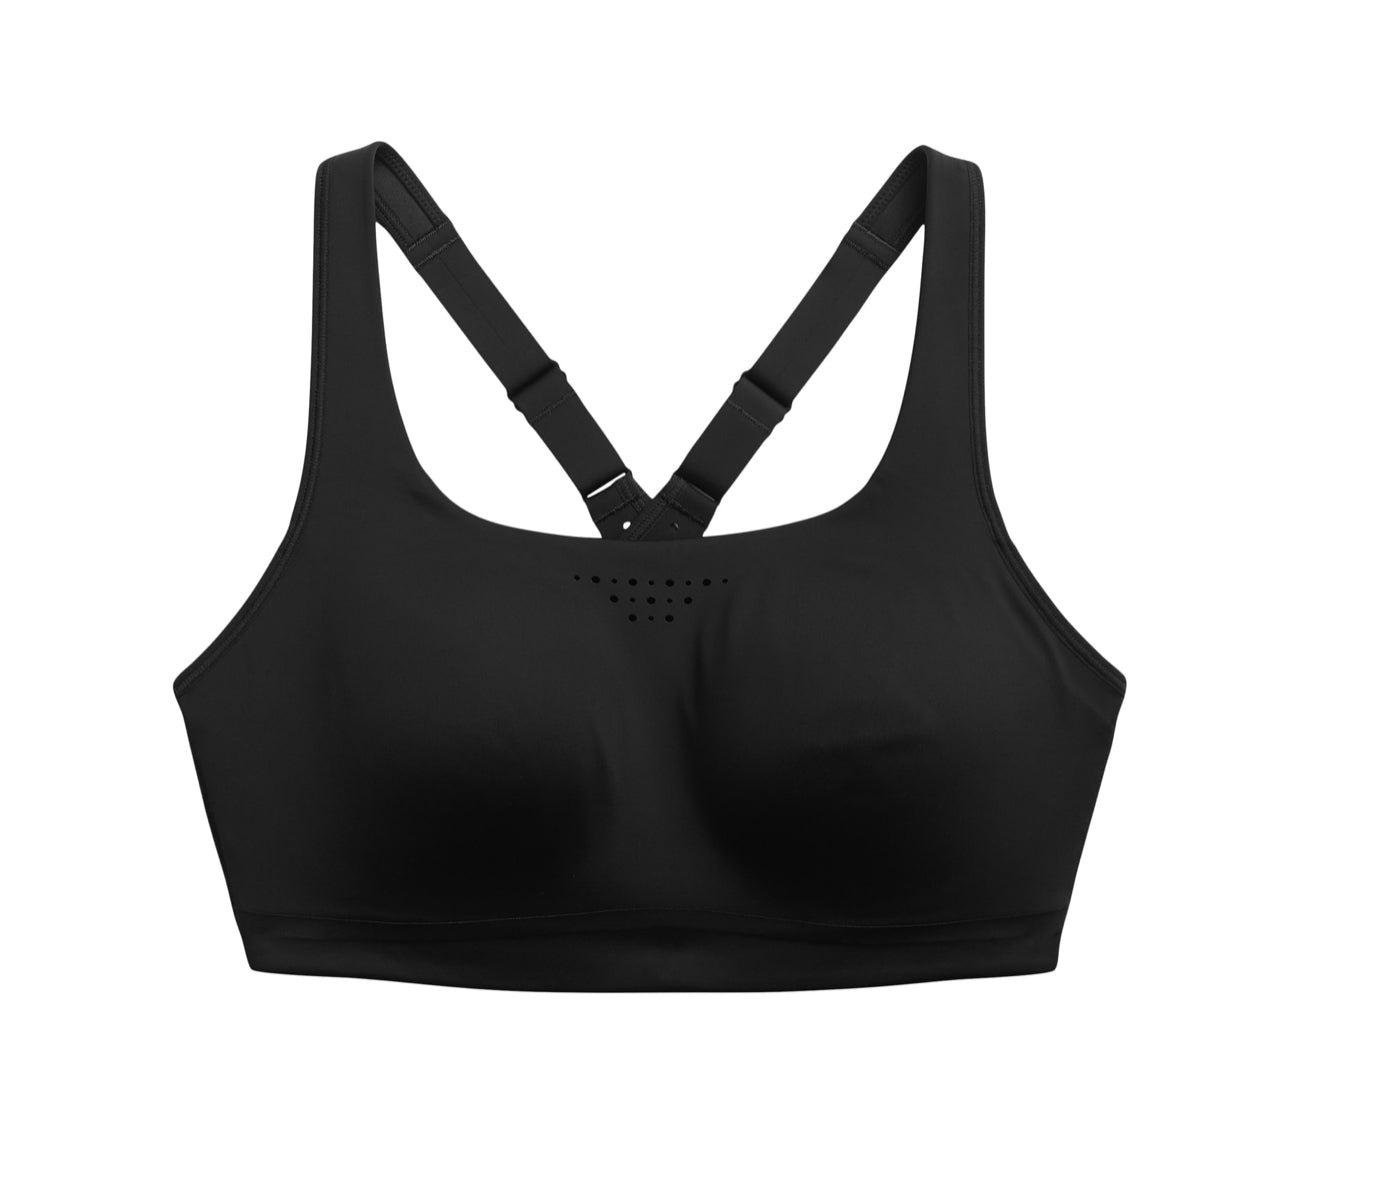 Athleta Advance Zip Front Bra Size 36DD Black NWT - $32 New With Tags -  From Rob